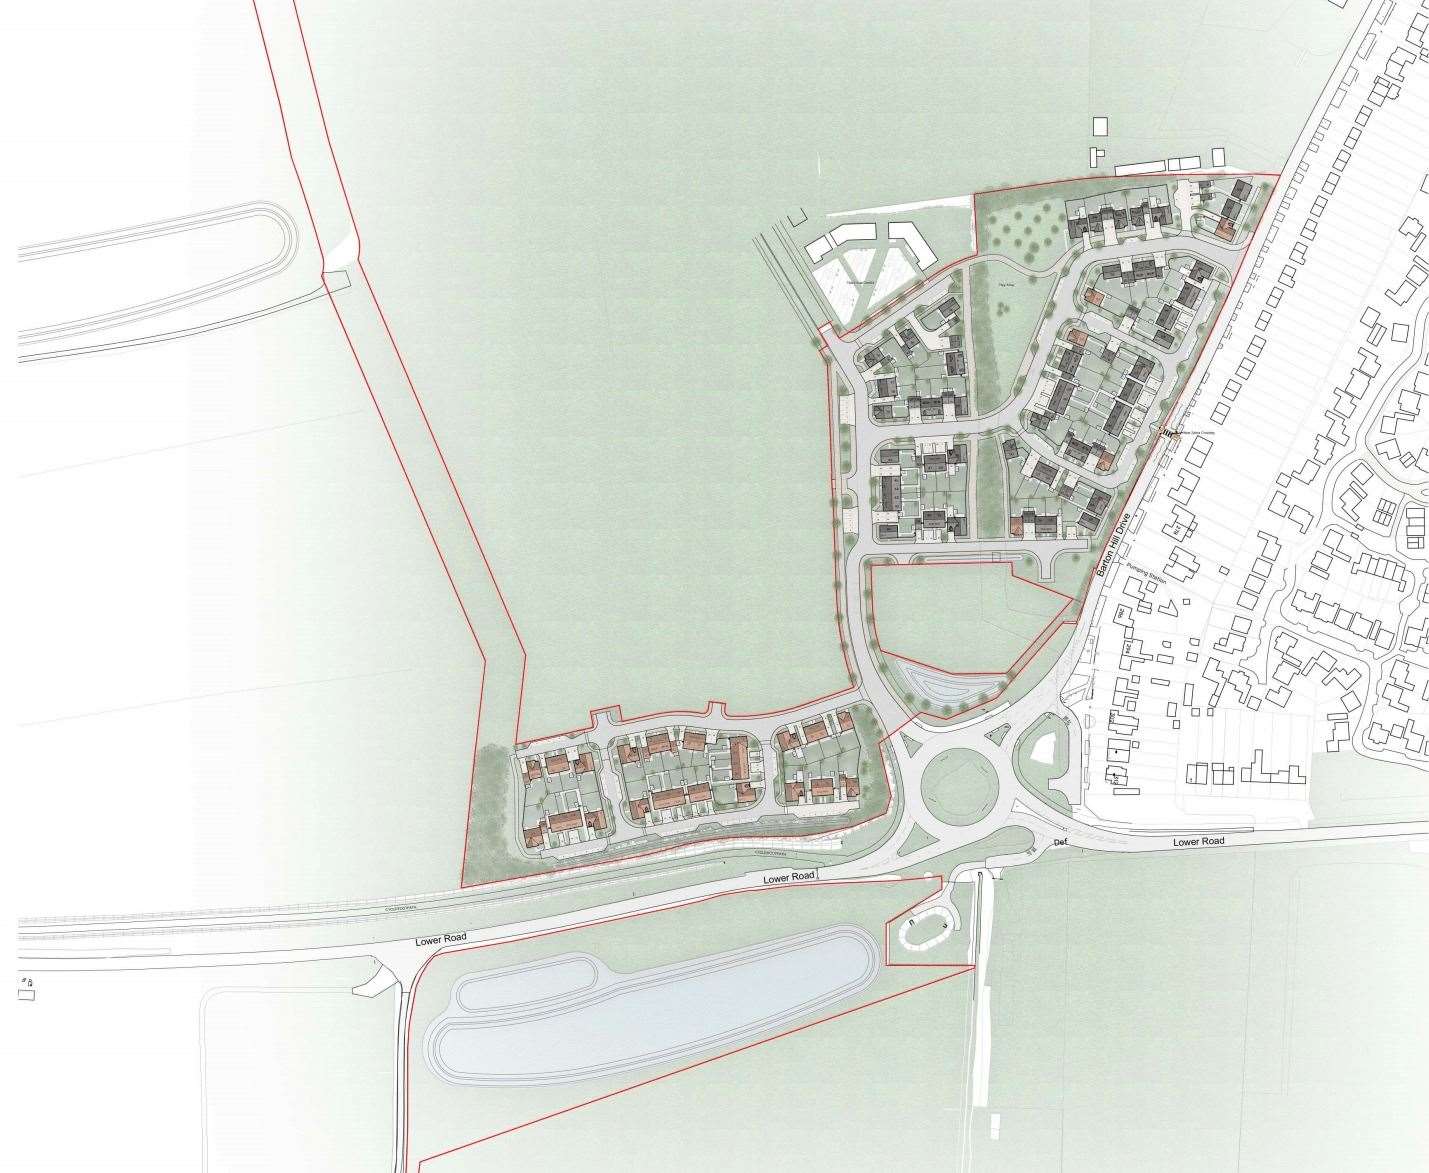 Where the Persimmon homes are planned for along the Lower Road and Barton Hill Drive, Minster, Sheppey